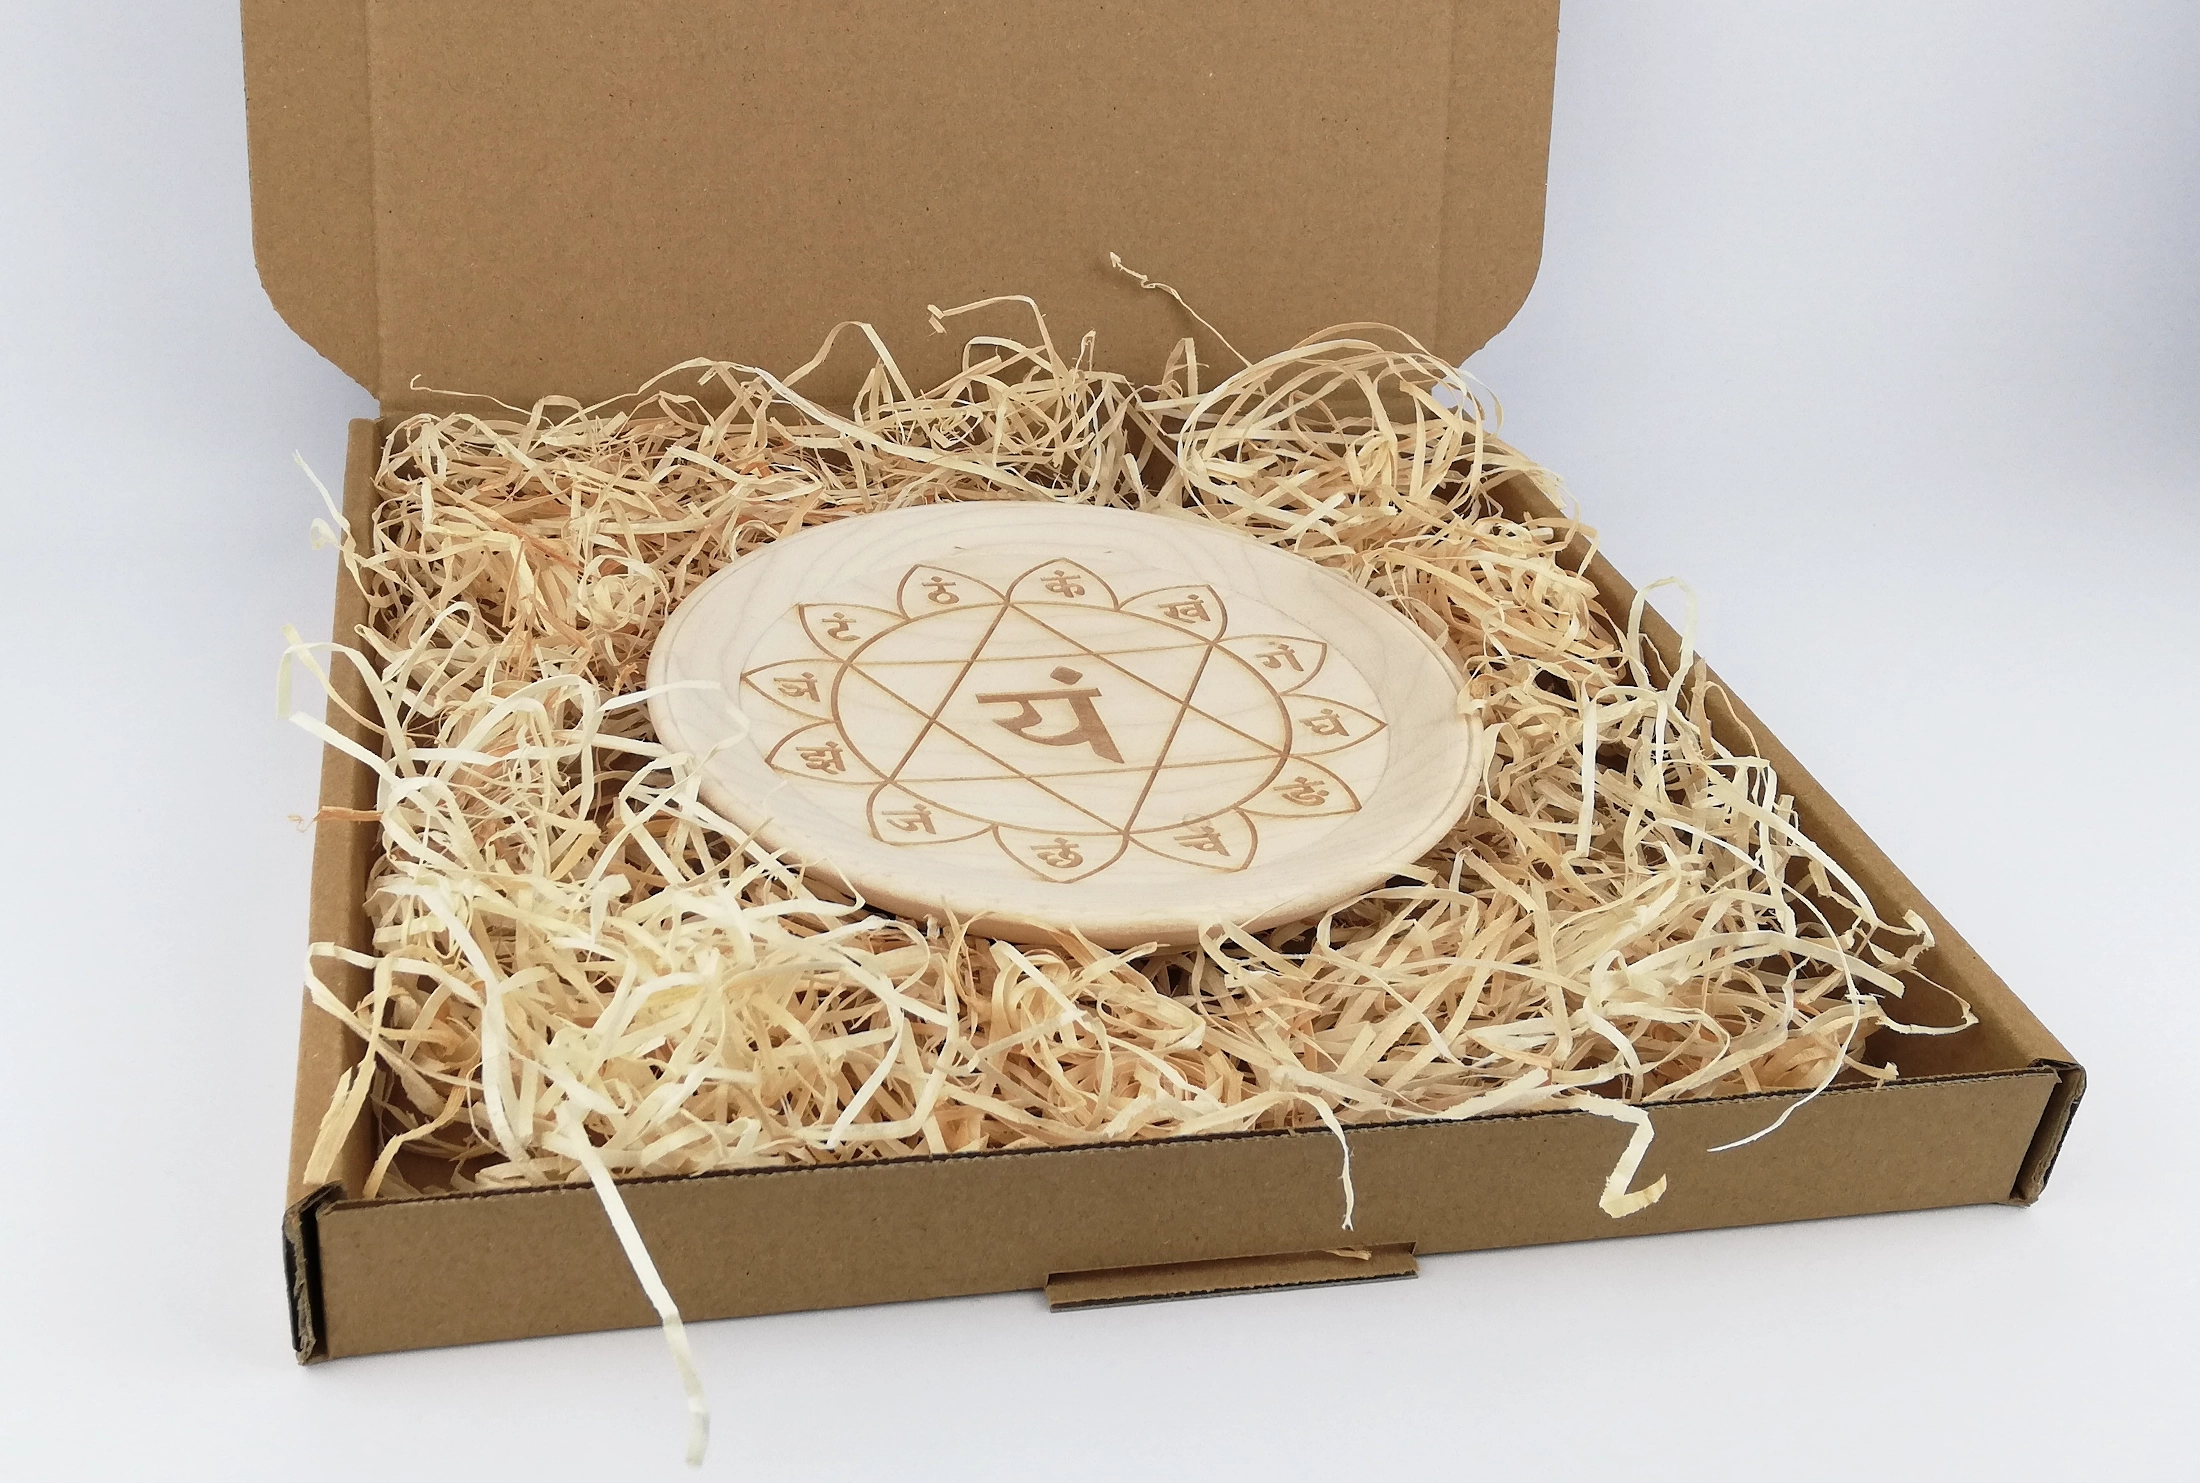 Heart chakra on a small plate (16cm/6.3in in diameter), packed in a box.